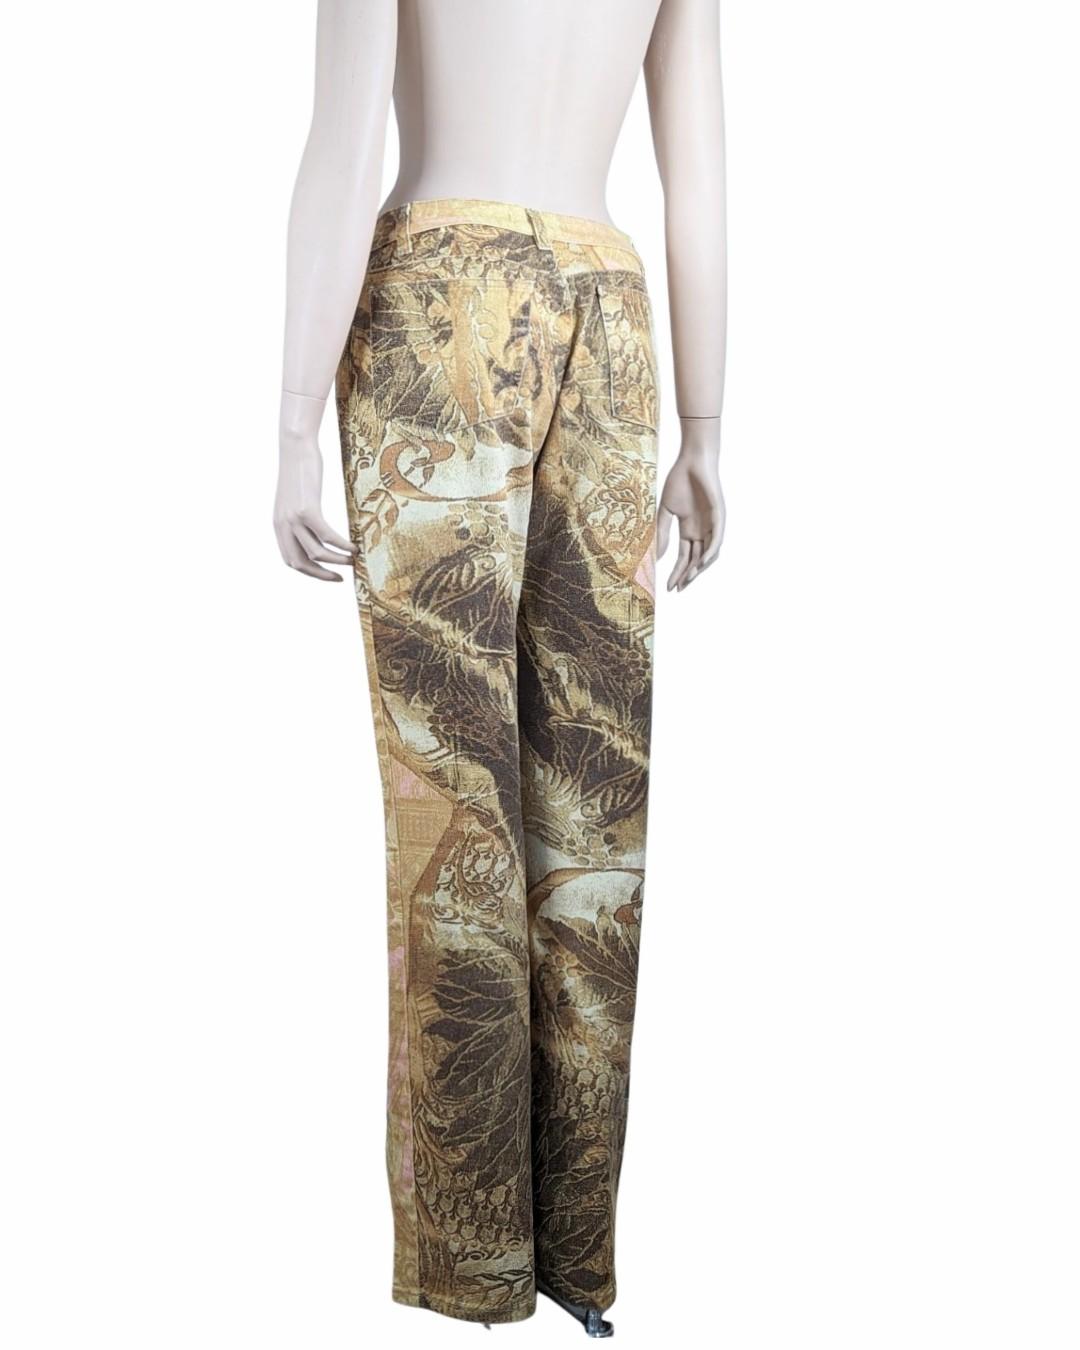 Roberto Cavalli F/W 2001 Gold Leaf Jeans In Excellent Condition For Sale In GOUVIEUX, FR